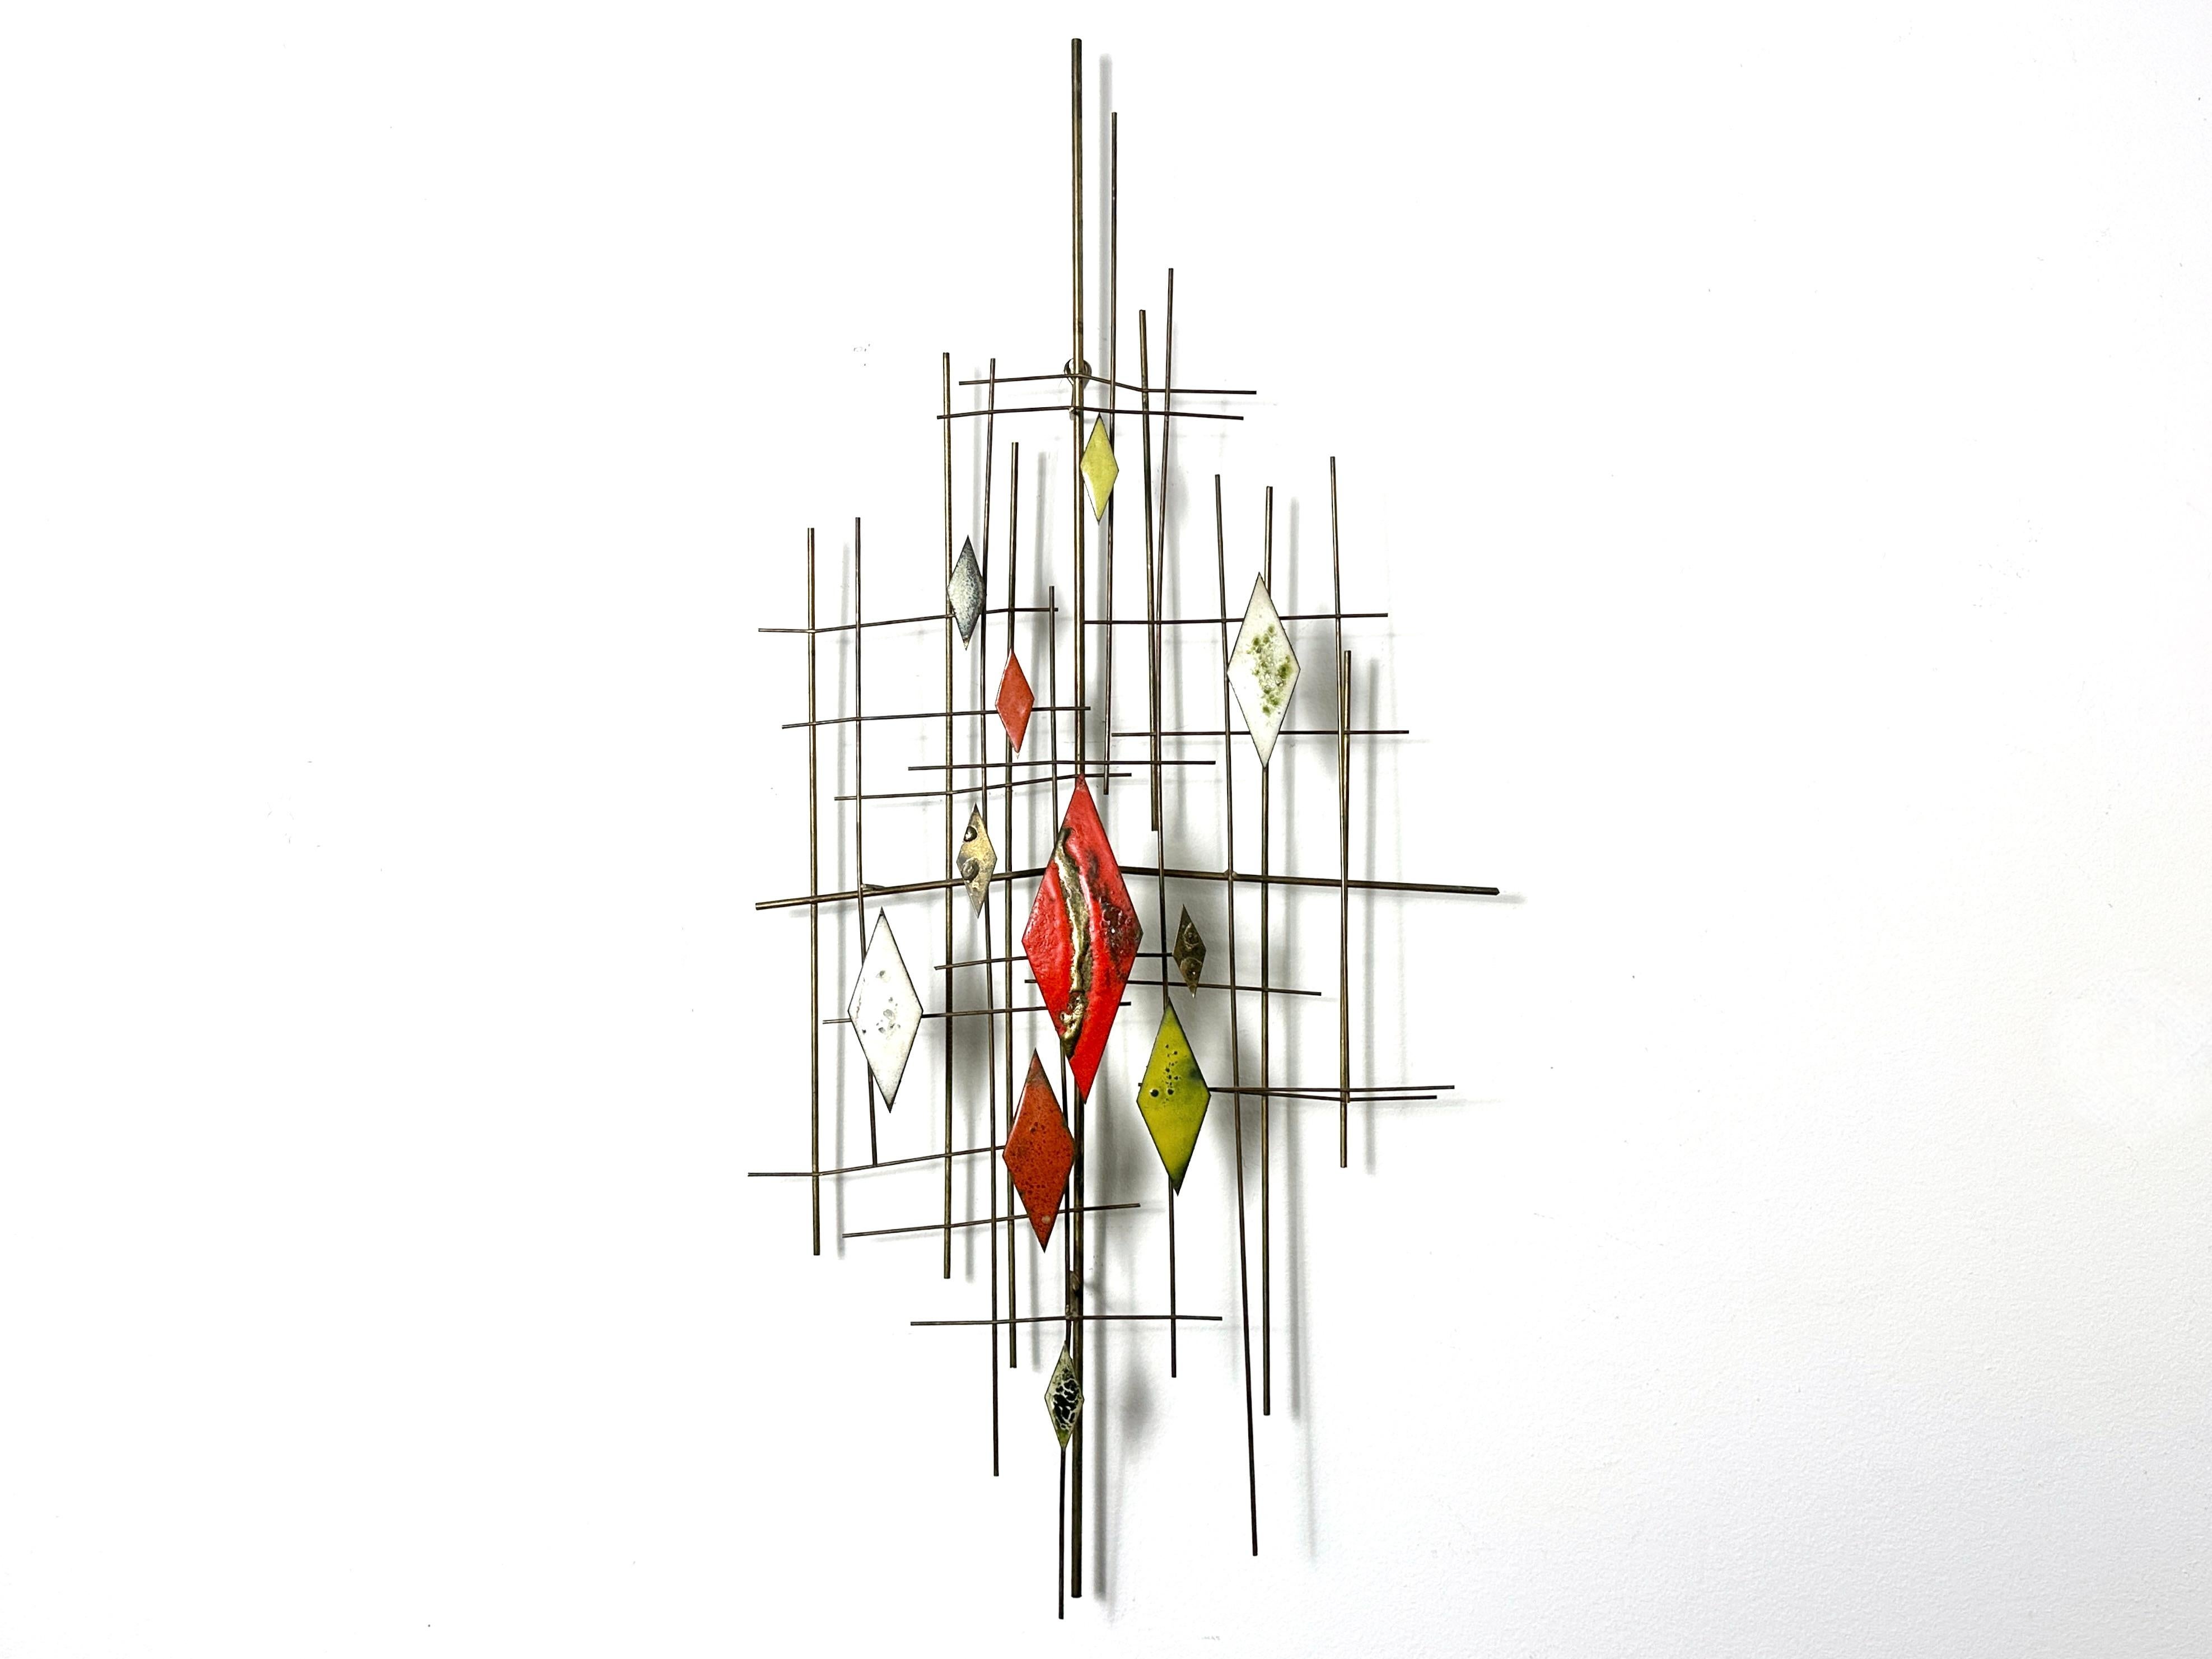 Original Mid Century modern wall sculpture attributed to Santora circa 1960s
Gold wire dimensional construction with red yellow and white enamel accents